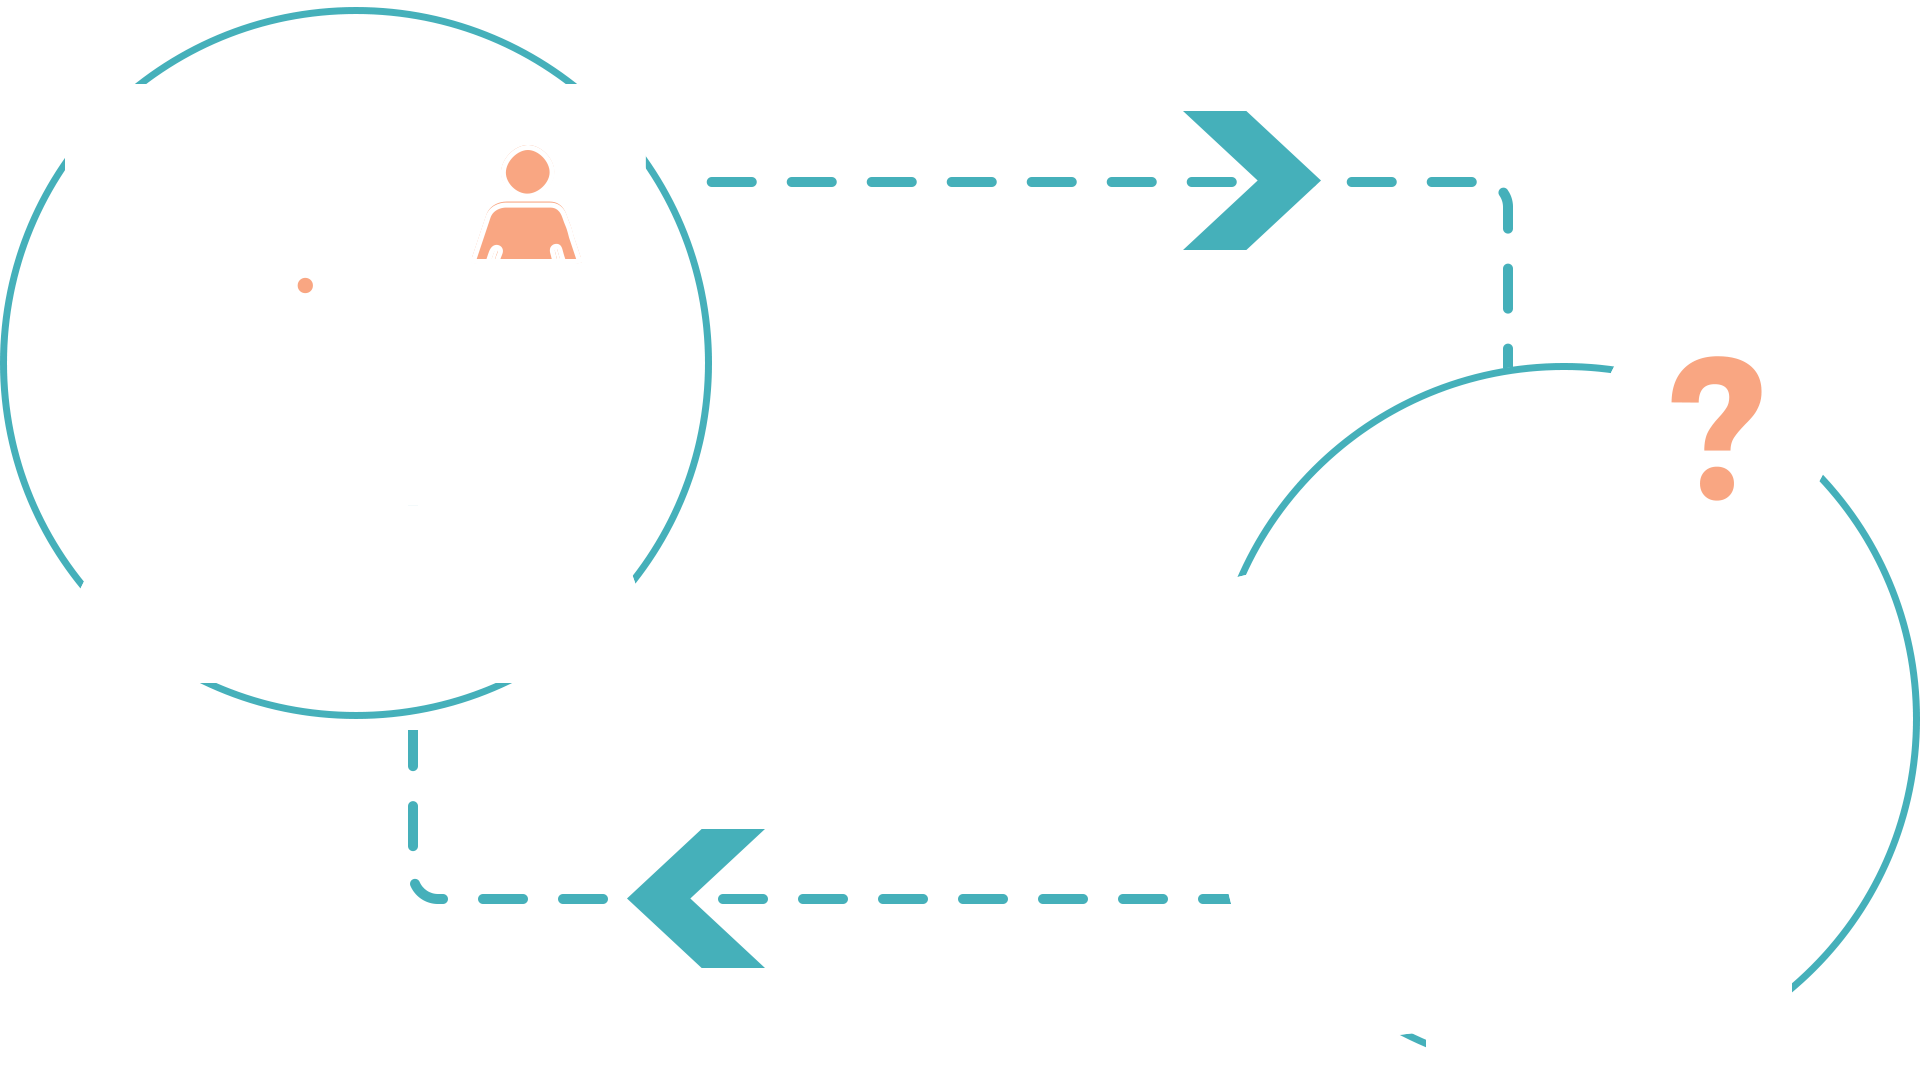 An illustration of a computer with a tutor and a bunch of worksheets. They are connected by dotted lines in a continuous, fluid cycle.